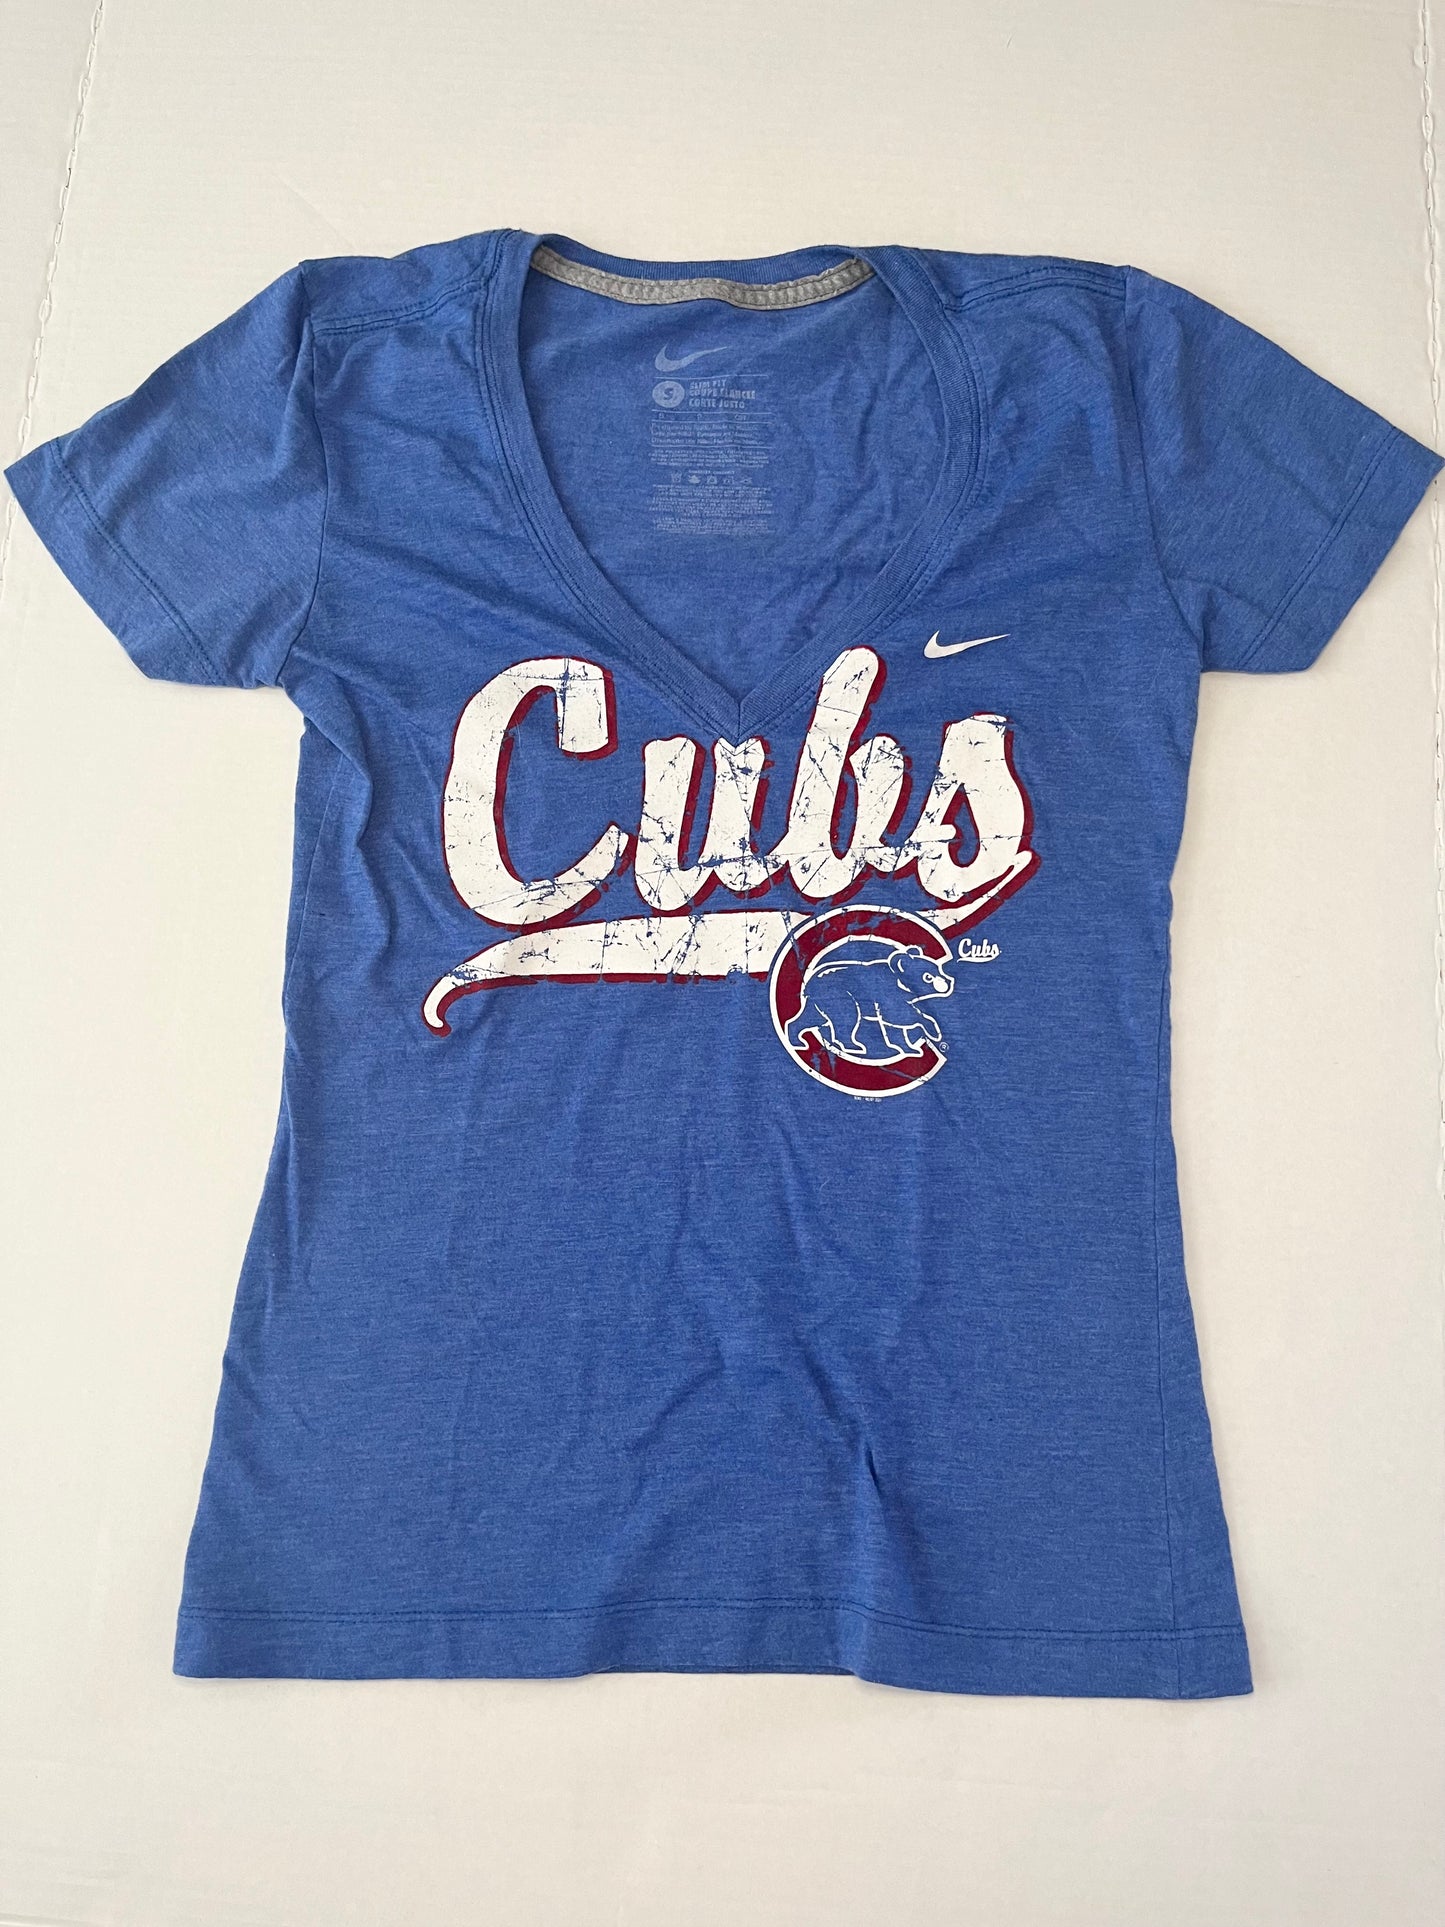 Women's Small Chicago Cubs T-Shirt (Nike)